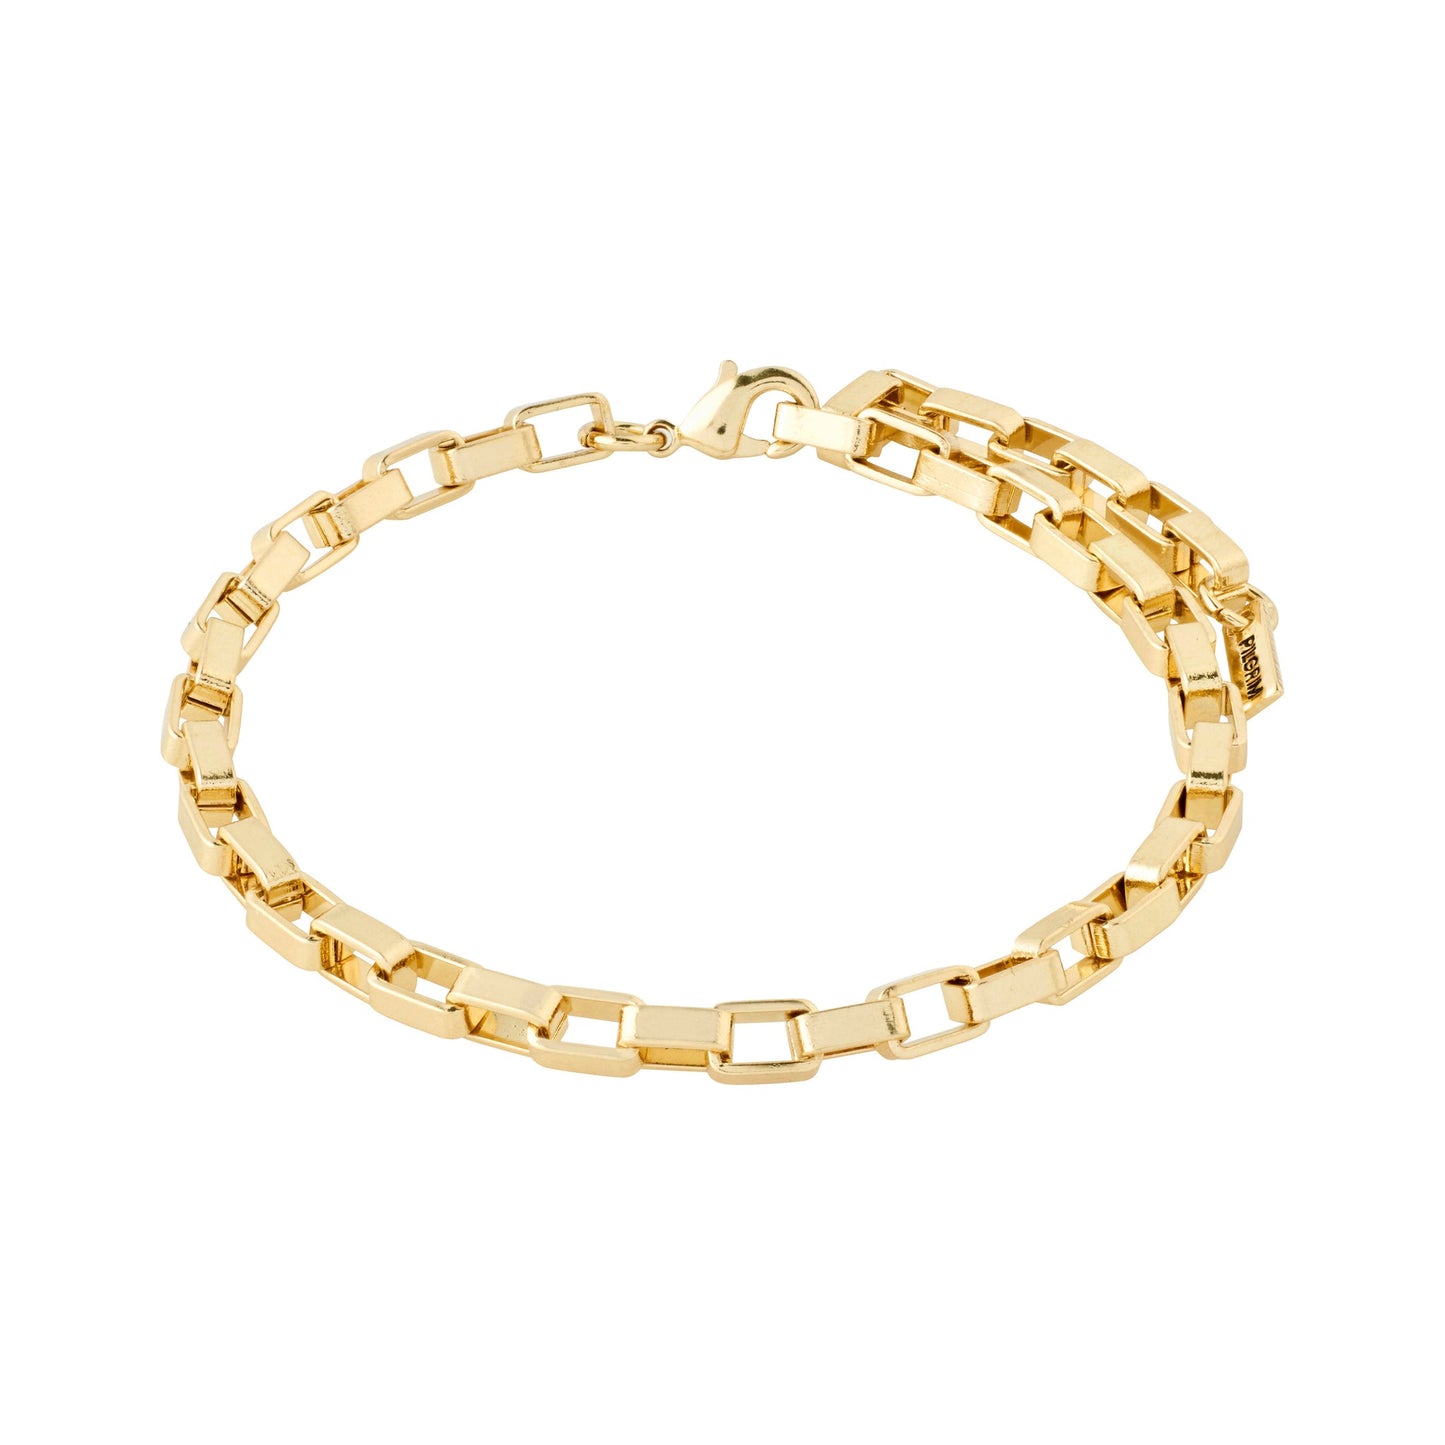 Clarity Bracelet - Gold Plated